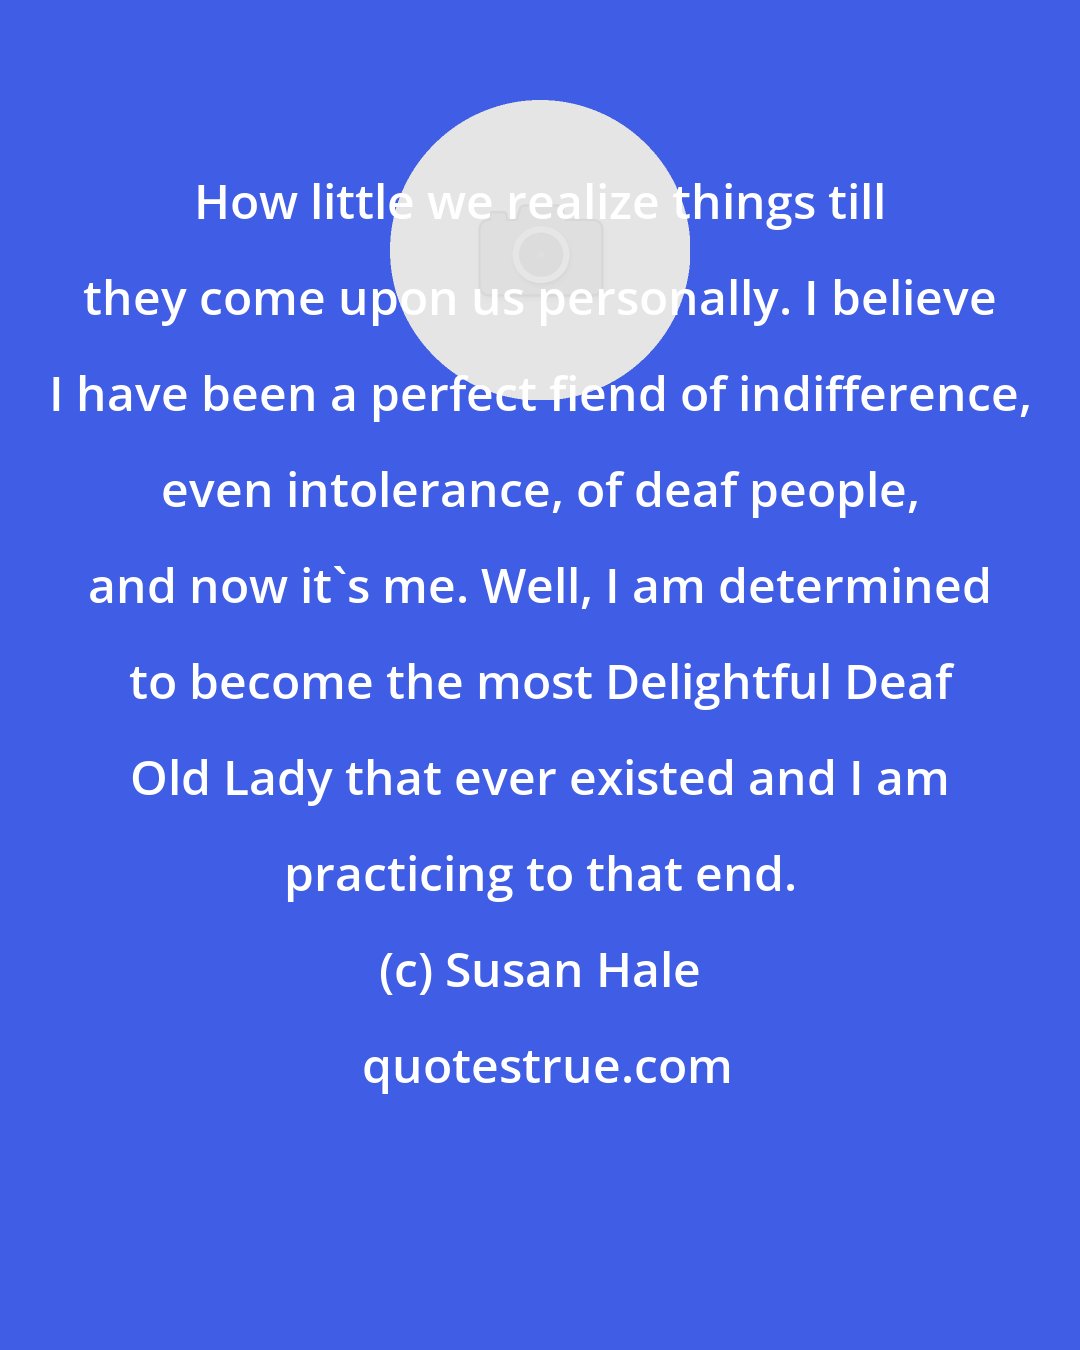 Susan Hale: How little we realize things till they come upon us personally. I believe I have been a perfect fiend of indifference, even intolerance, of deaf people, and now it's me. Well, I am determined to become the most Delightful Deaf Old Lady that ever existed and I am practicing to that end.